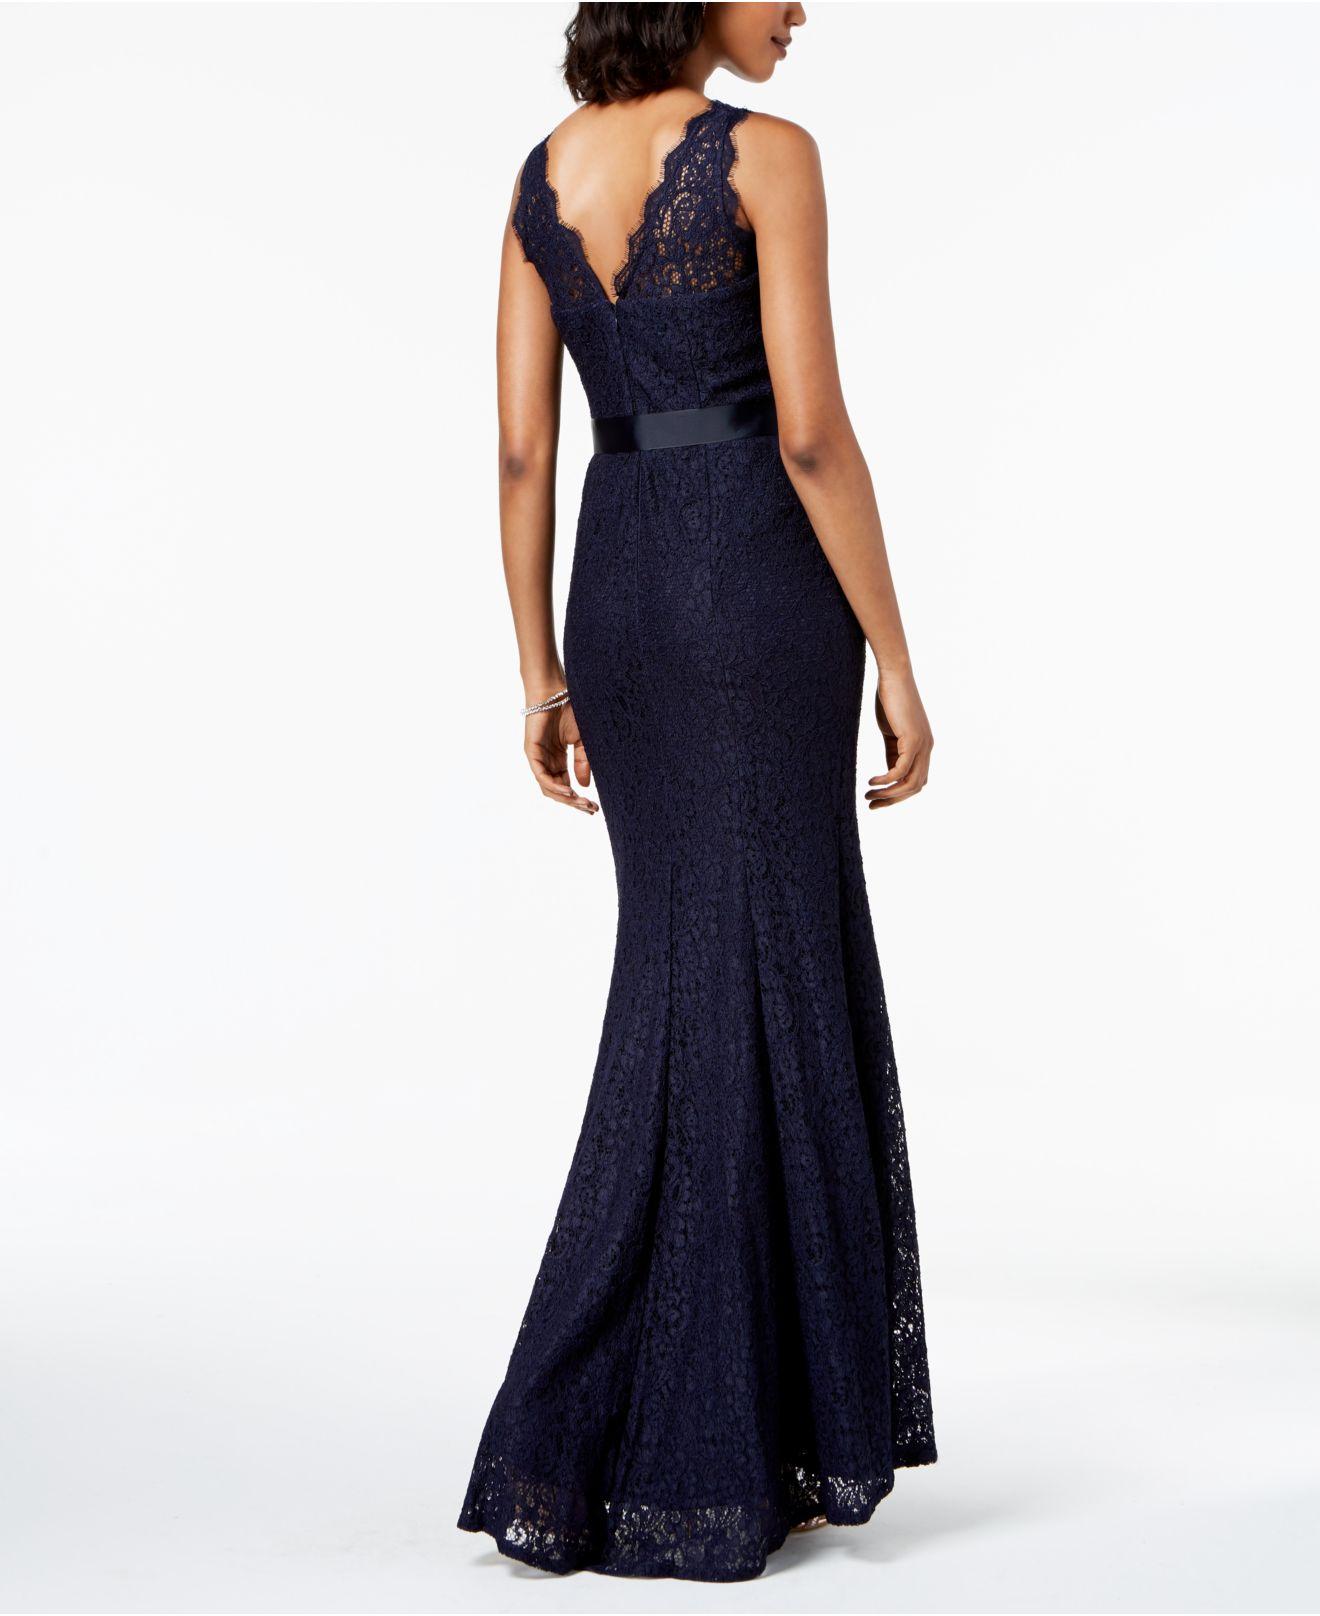 Adrianna Papell Lace V-neck Satin Sash Gown in Navy (Blue) - Lyst